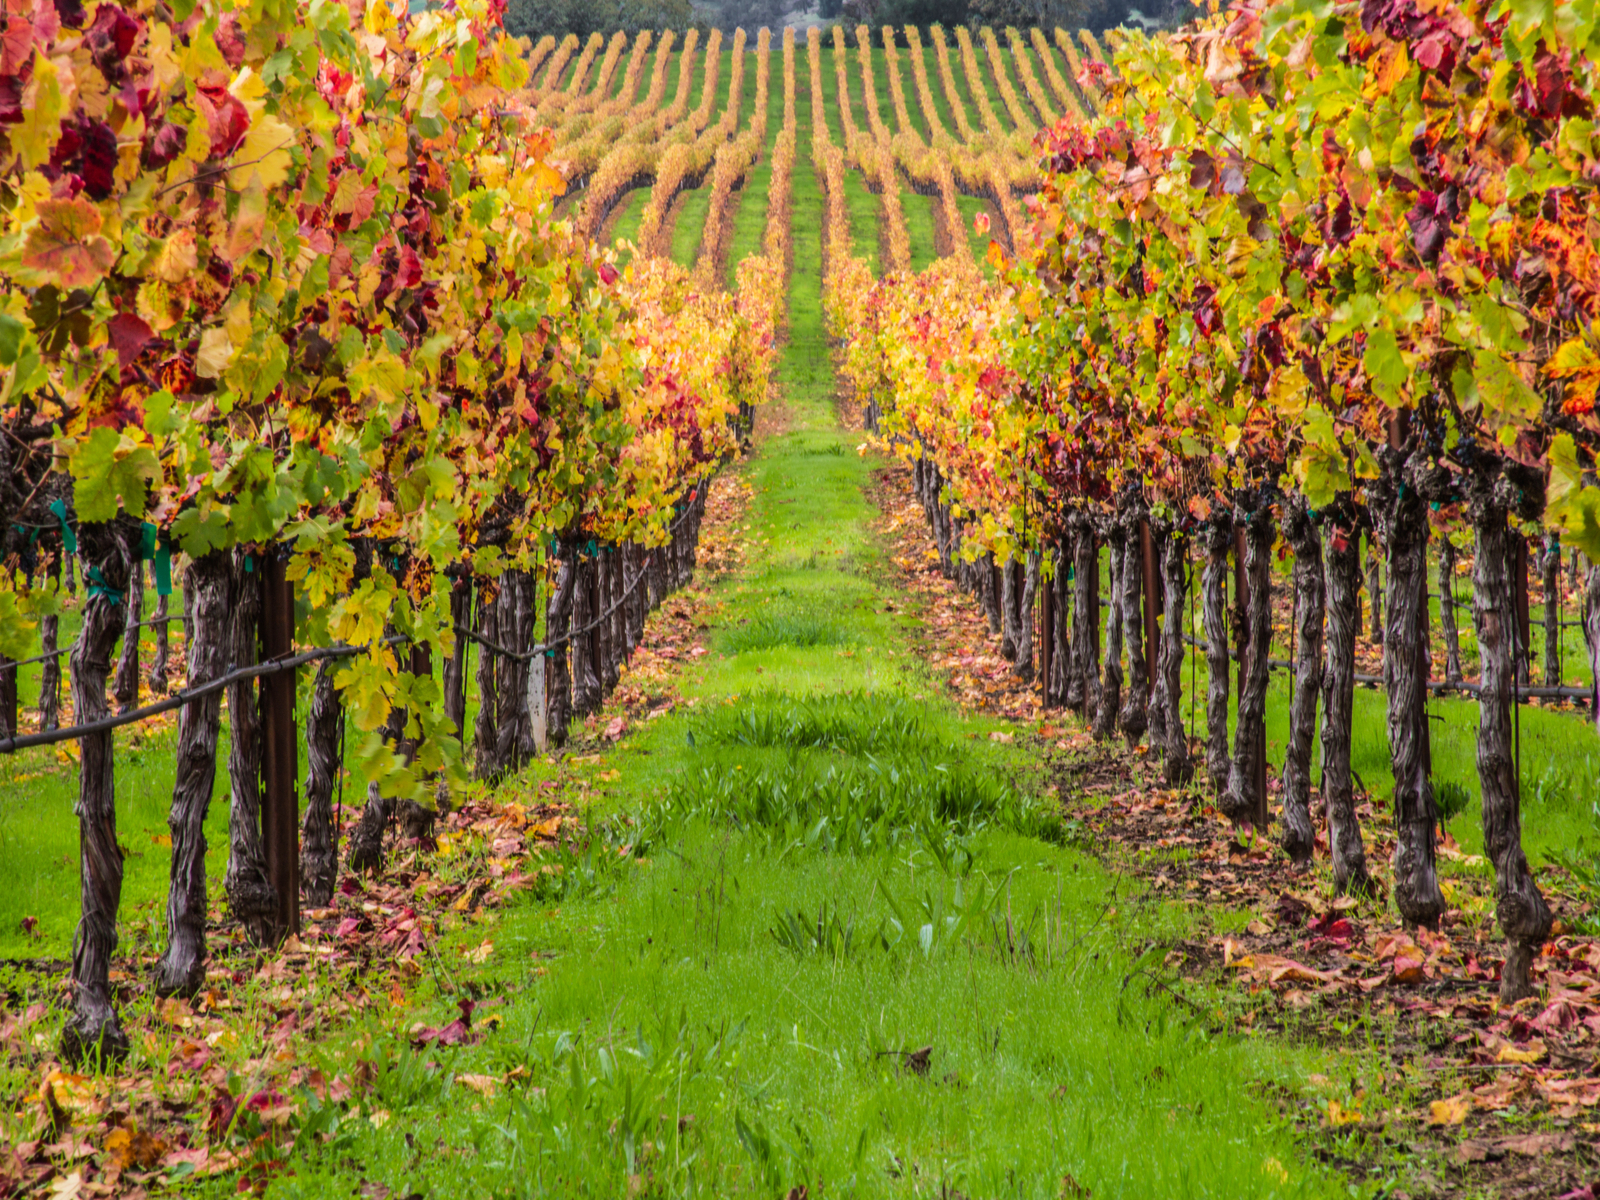 Vineyard pictured with orange leaves during the cheapest time to visit Napa Valley, the Fall